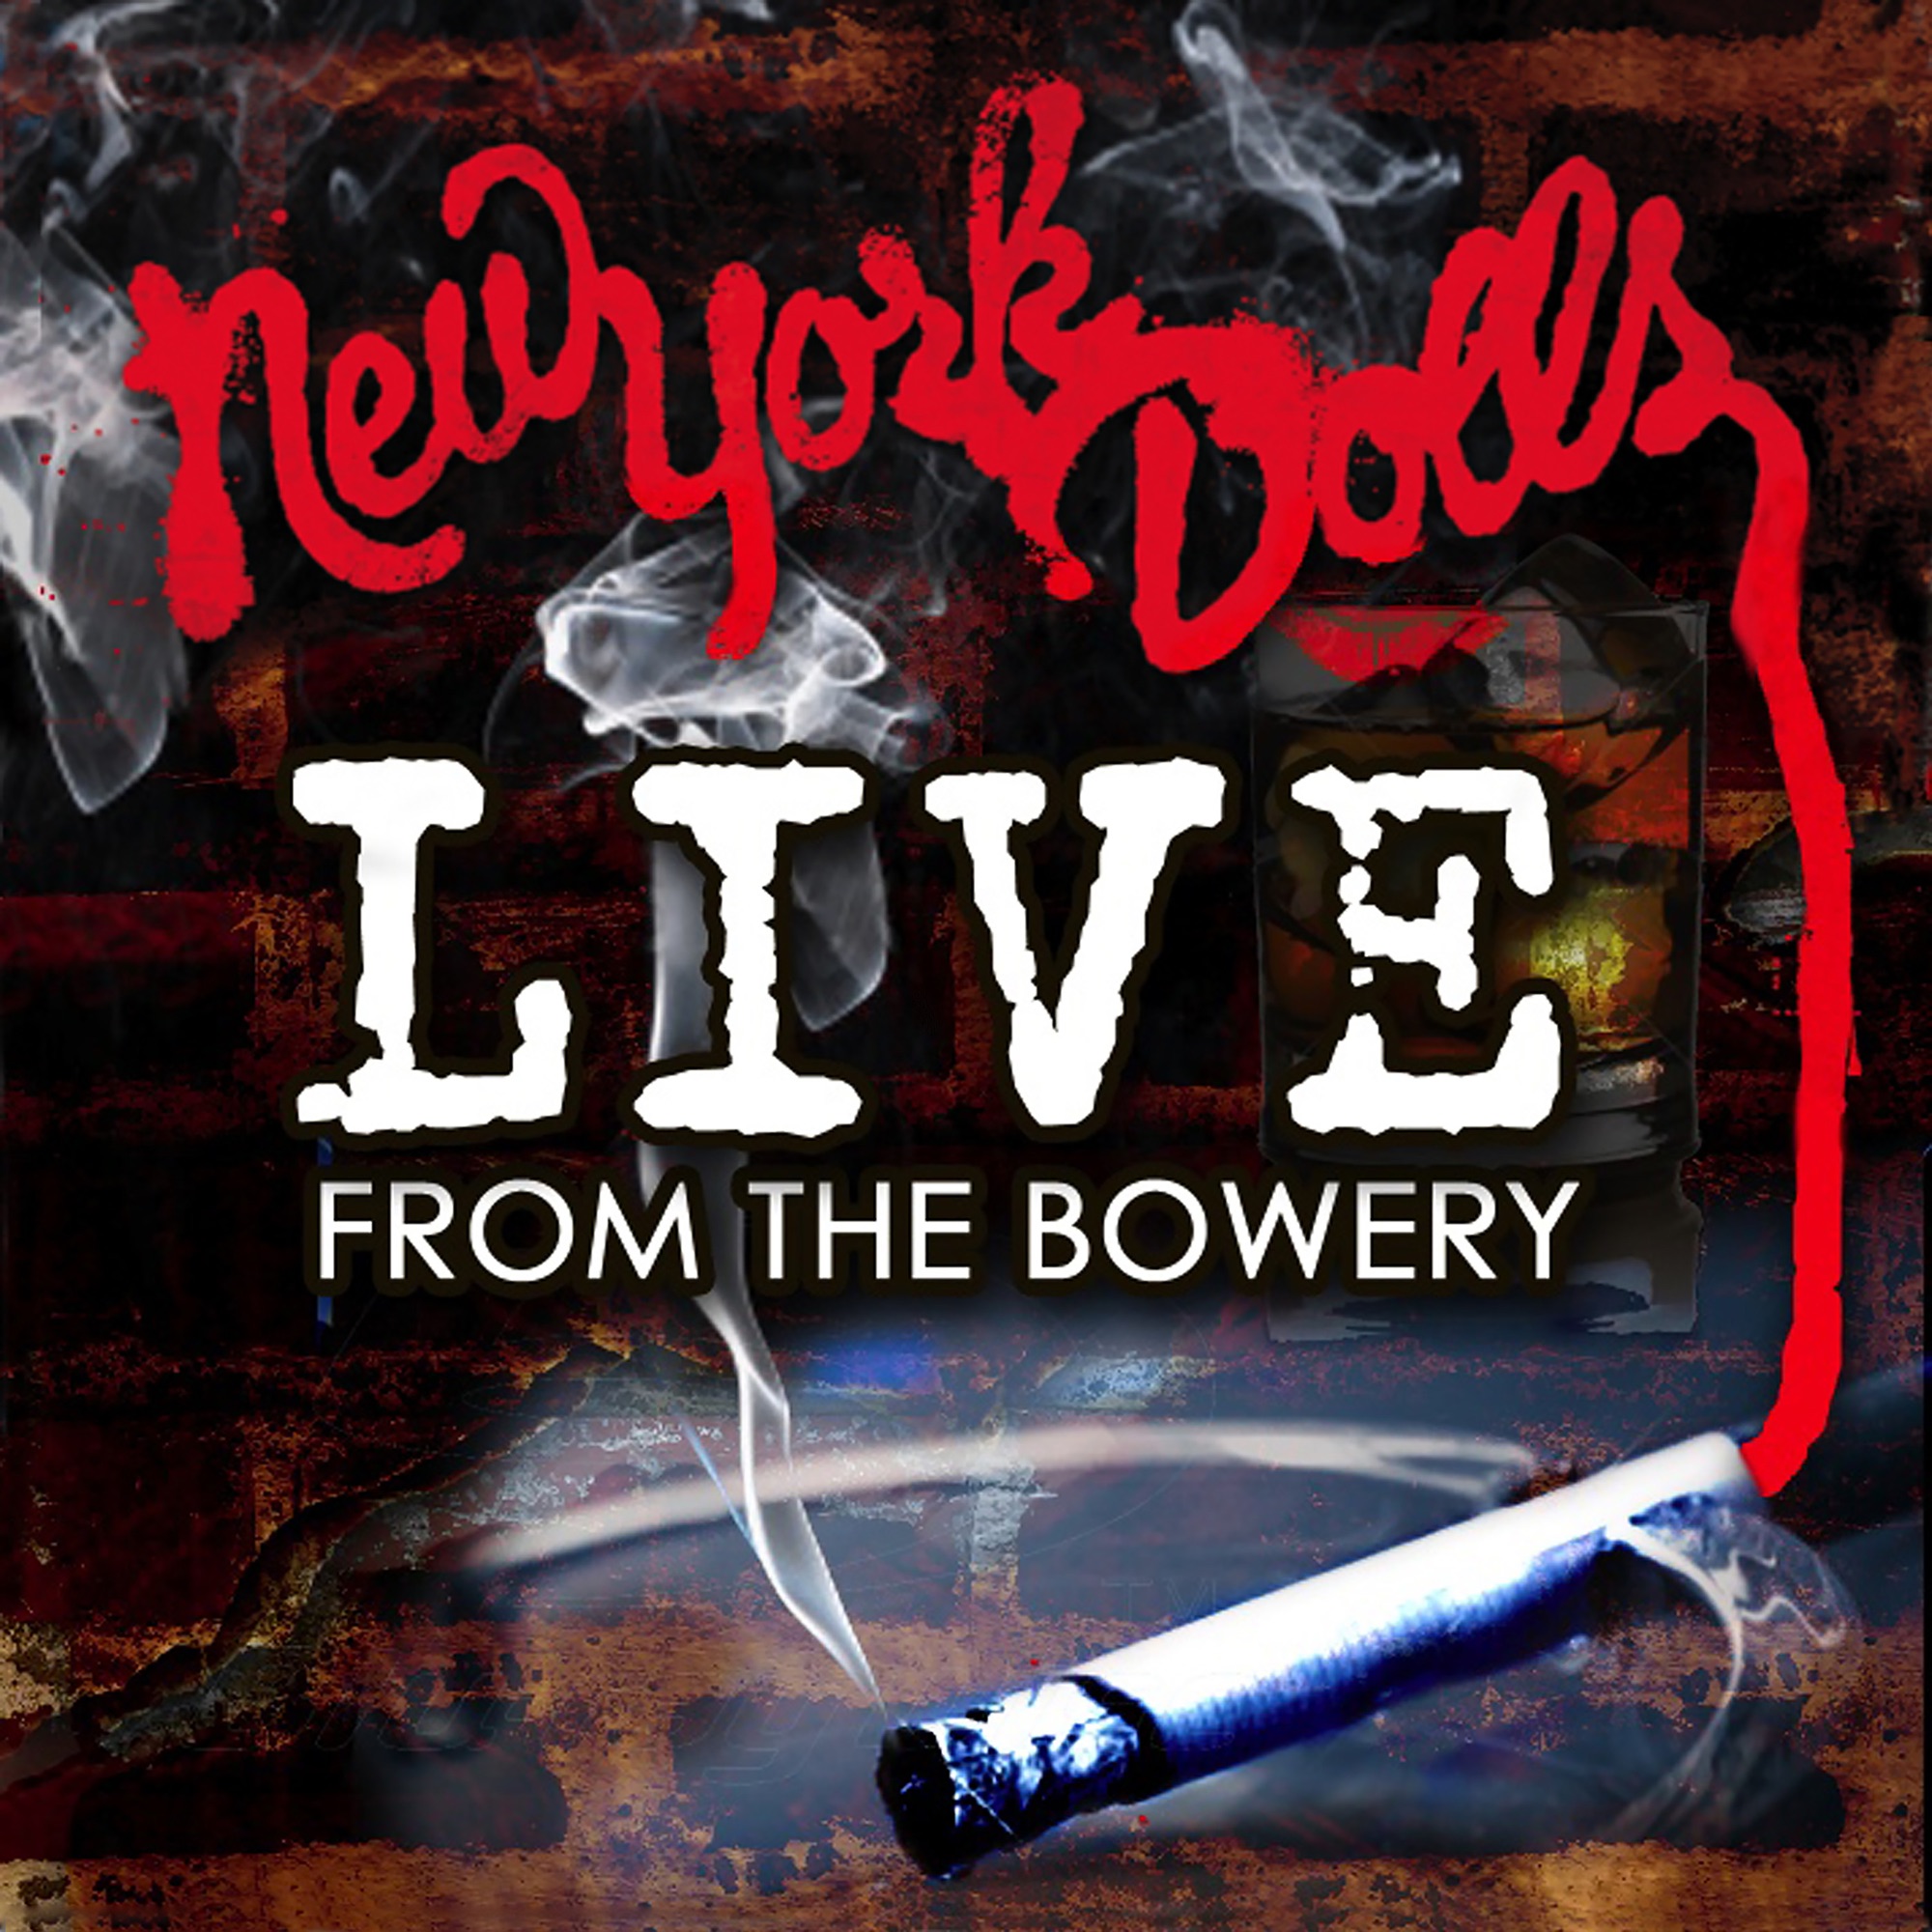 Art for Personality Crisis (Bowery Ballroom, New York, 2011) by New York Dolls